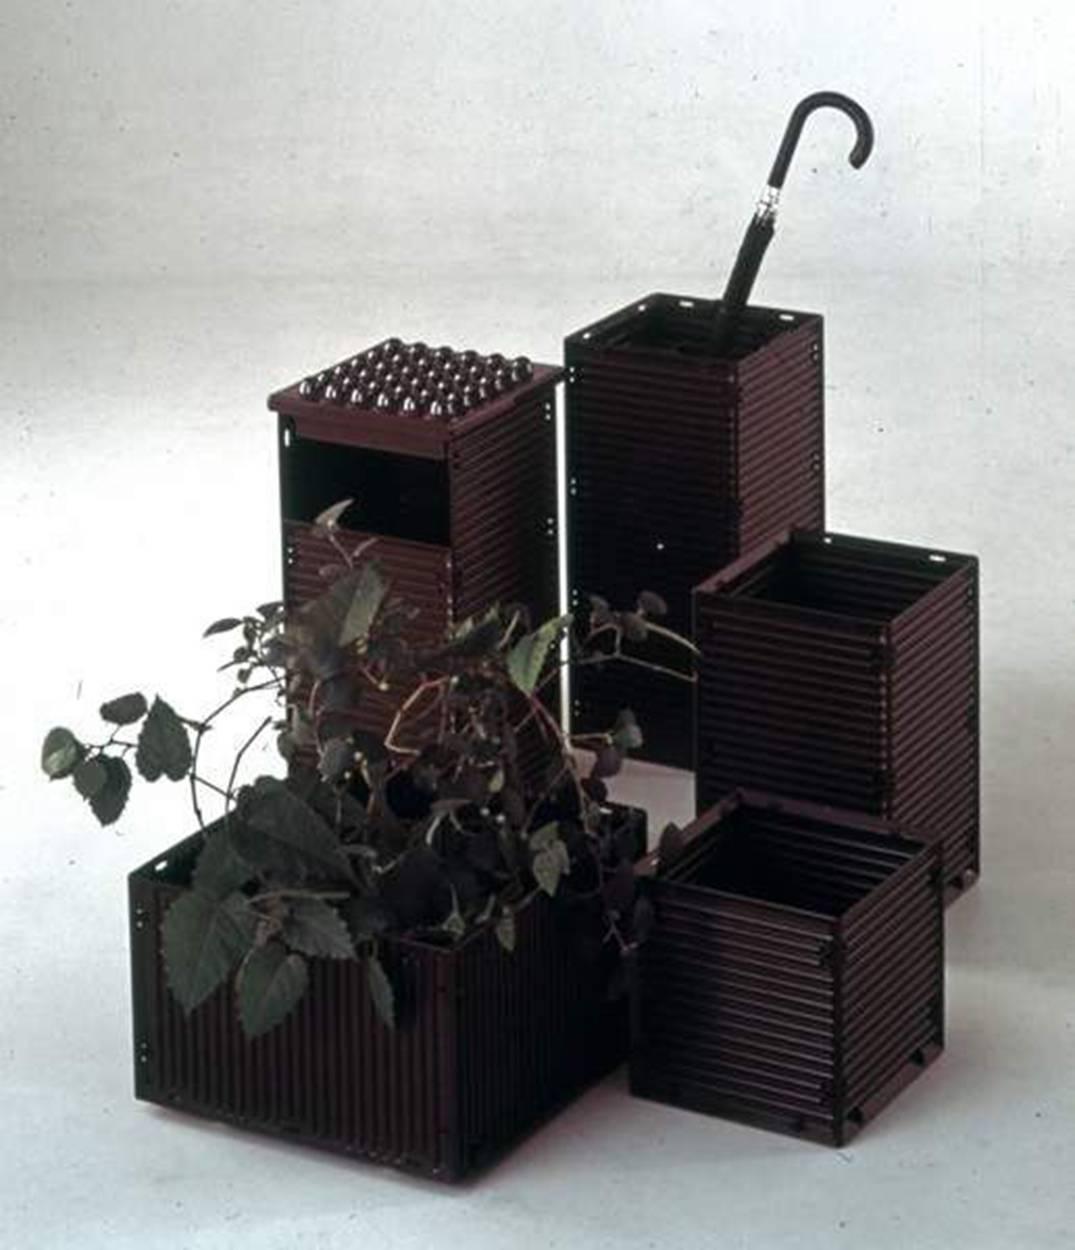 From the Olivetti Synthesis Sistema 45 collection
designed by Ettore Sottsass, a very rare brown planter on wheels
Two pieces available.